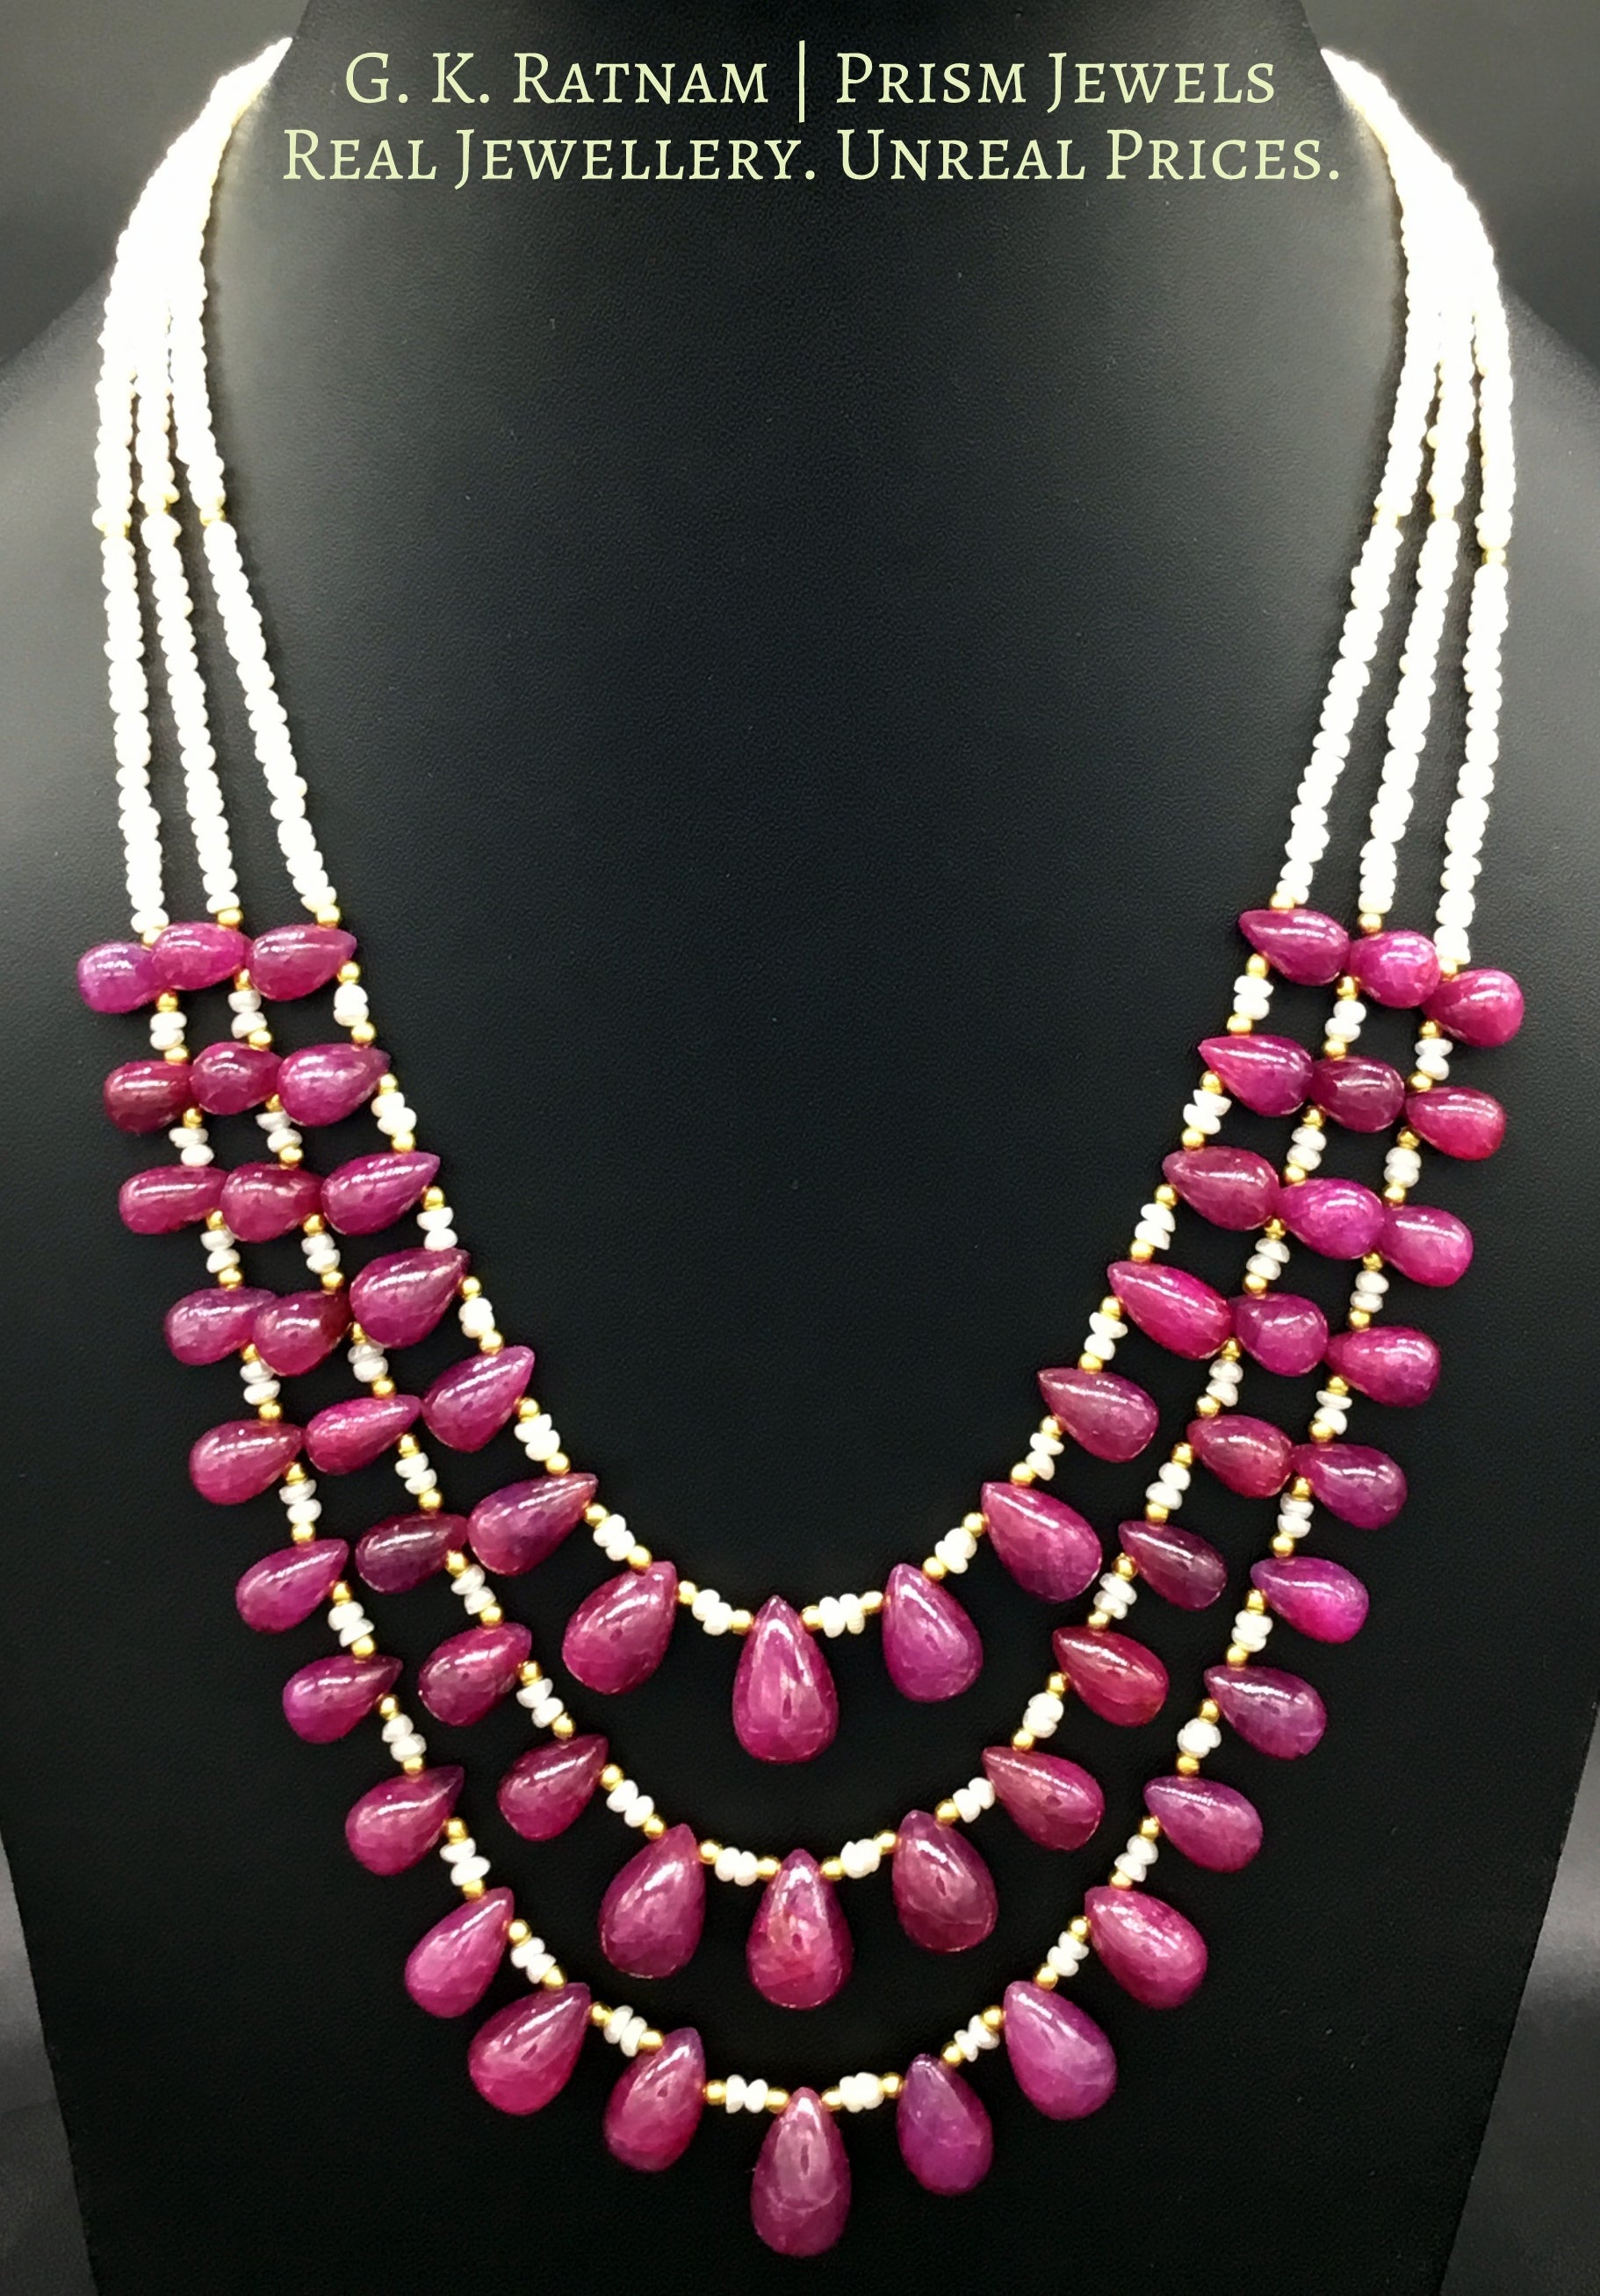 Three-row Necklace with ruby drops and hyderabadi pearls - G. K. Ratnam